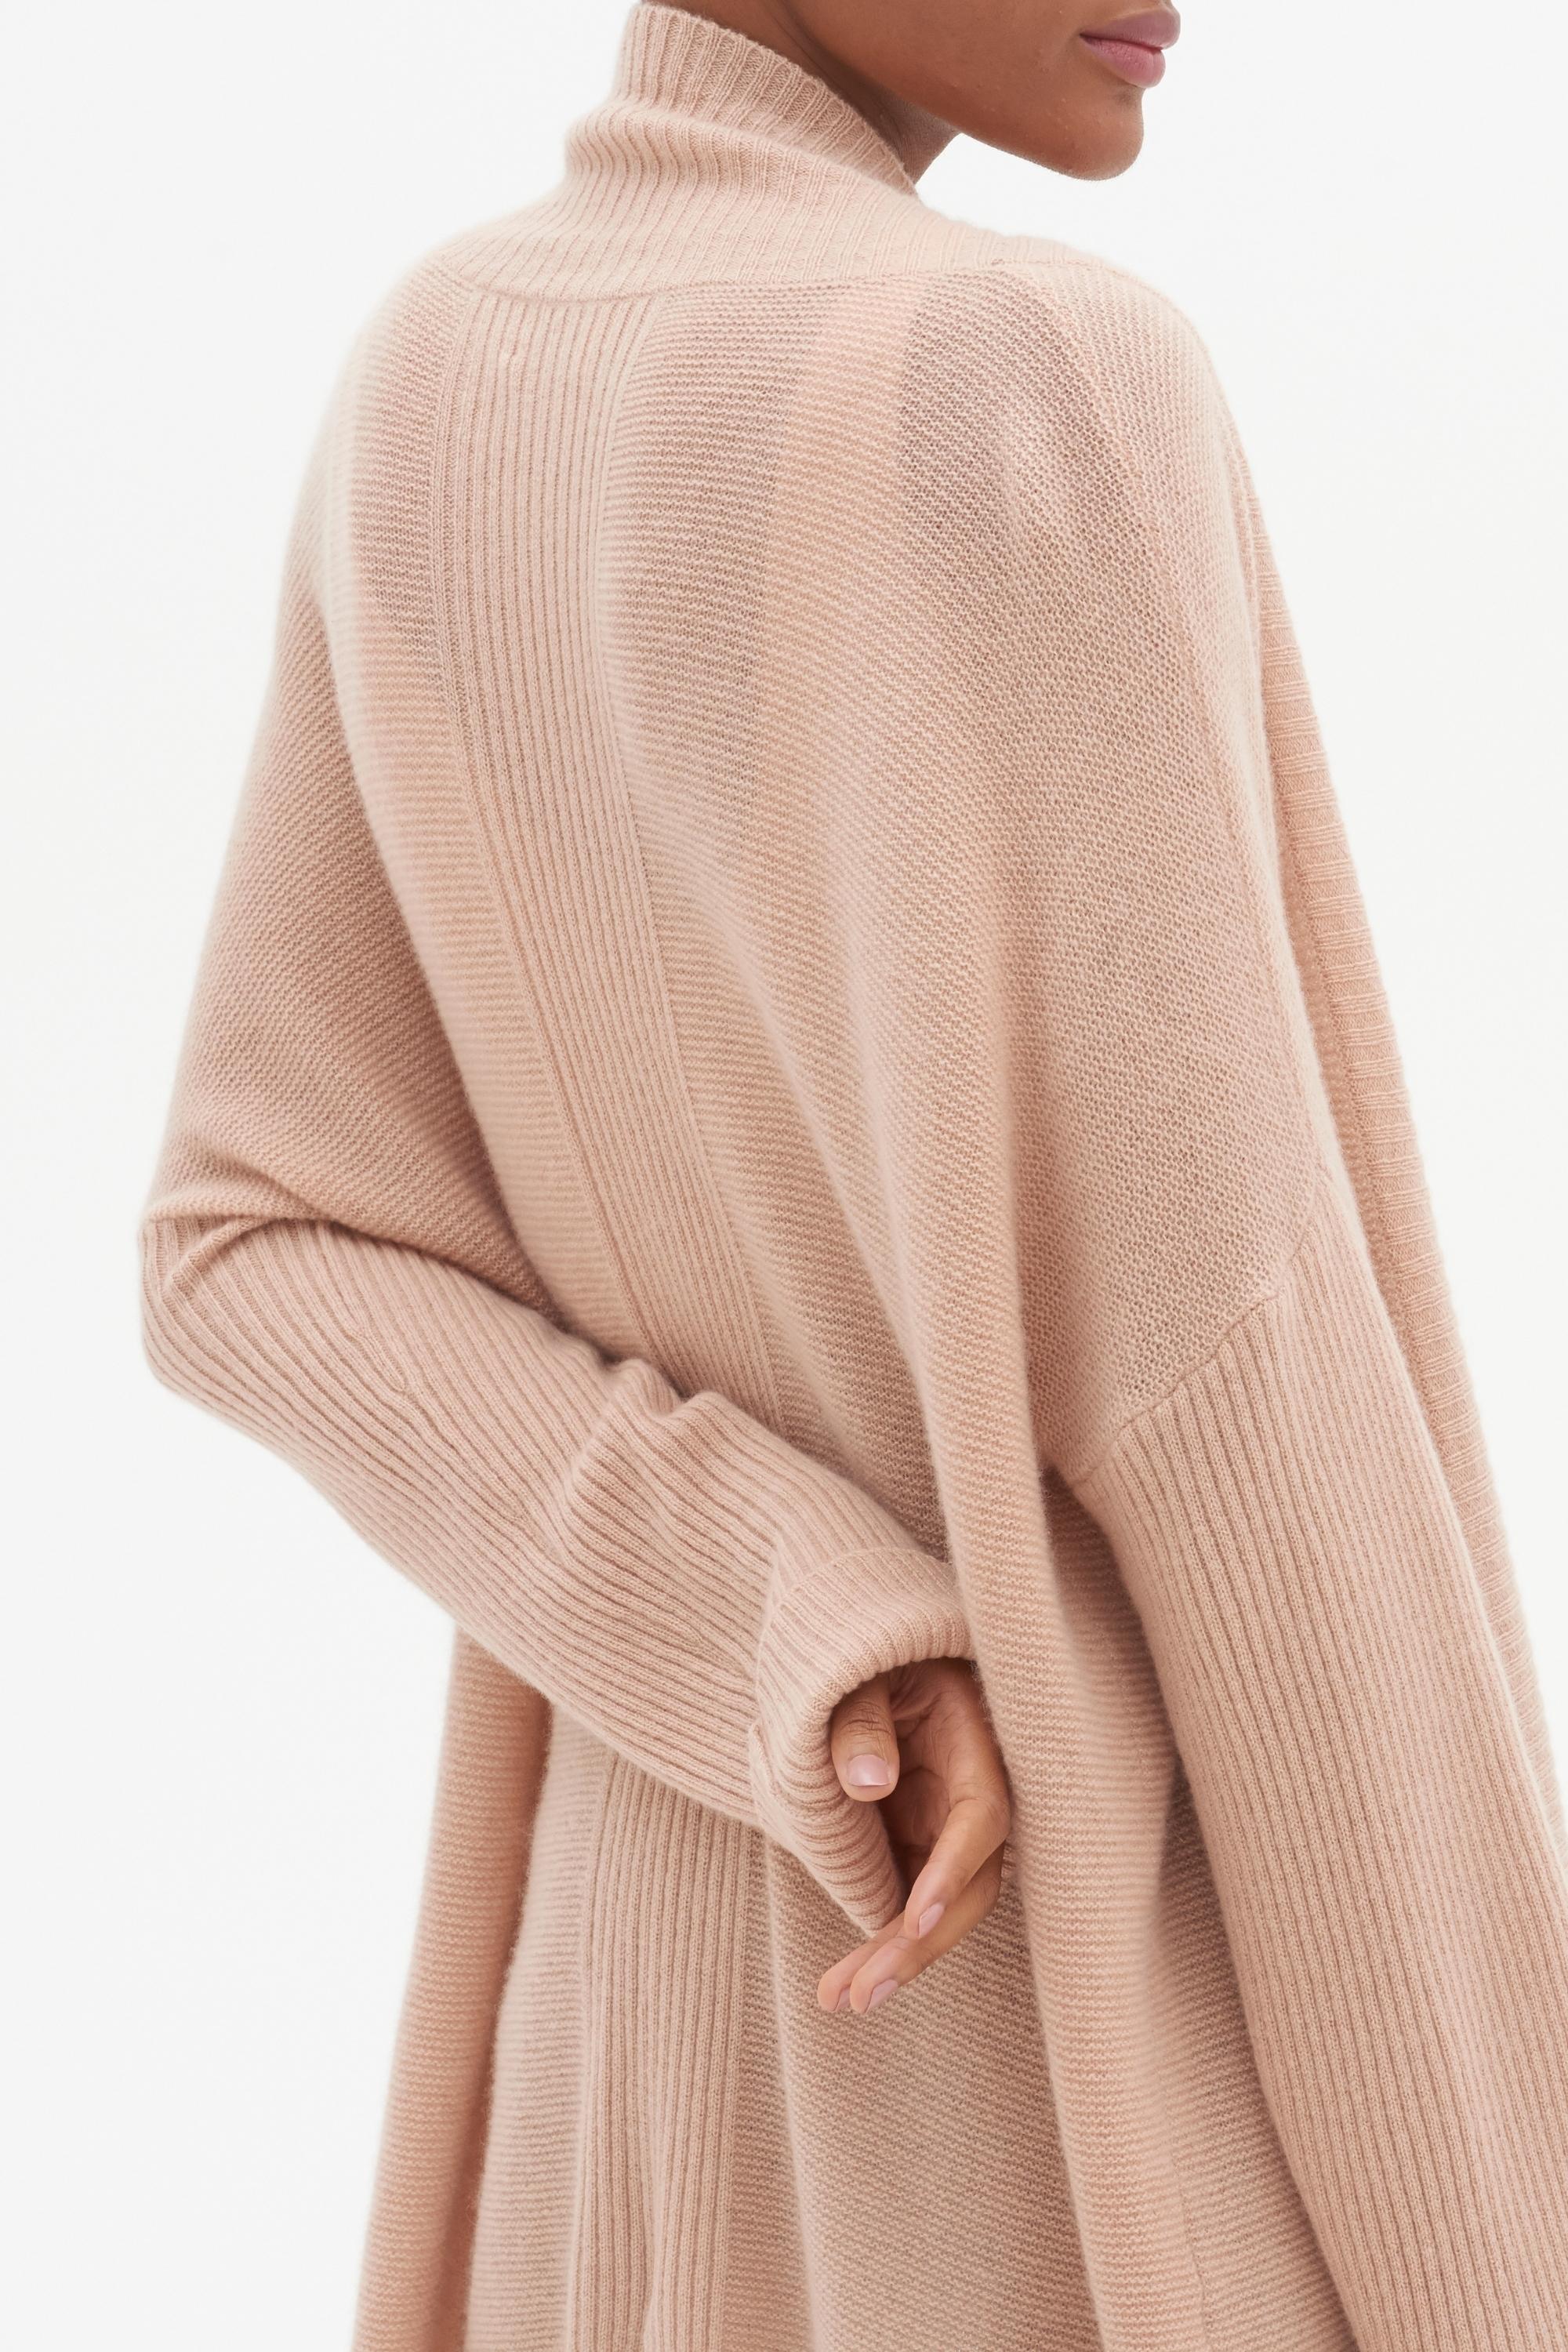 Cashmere Edge To Edge Cardigan - Made to Order